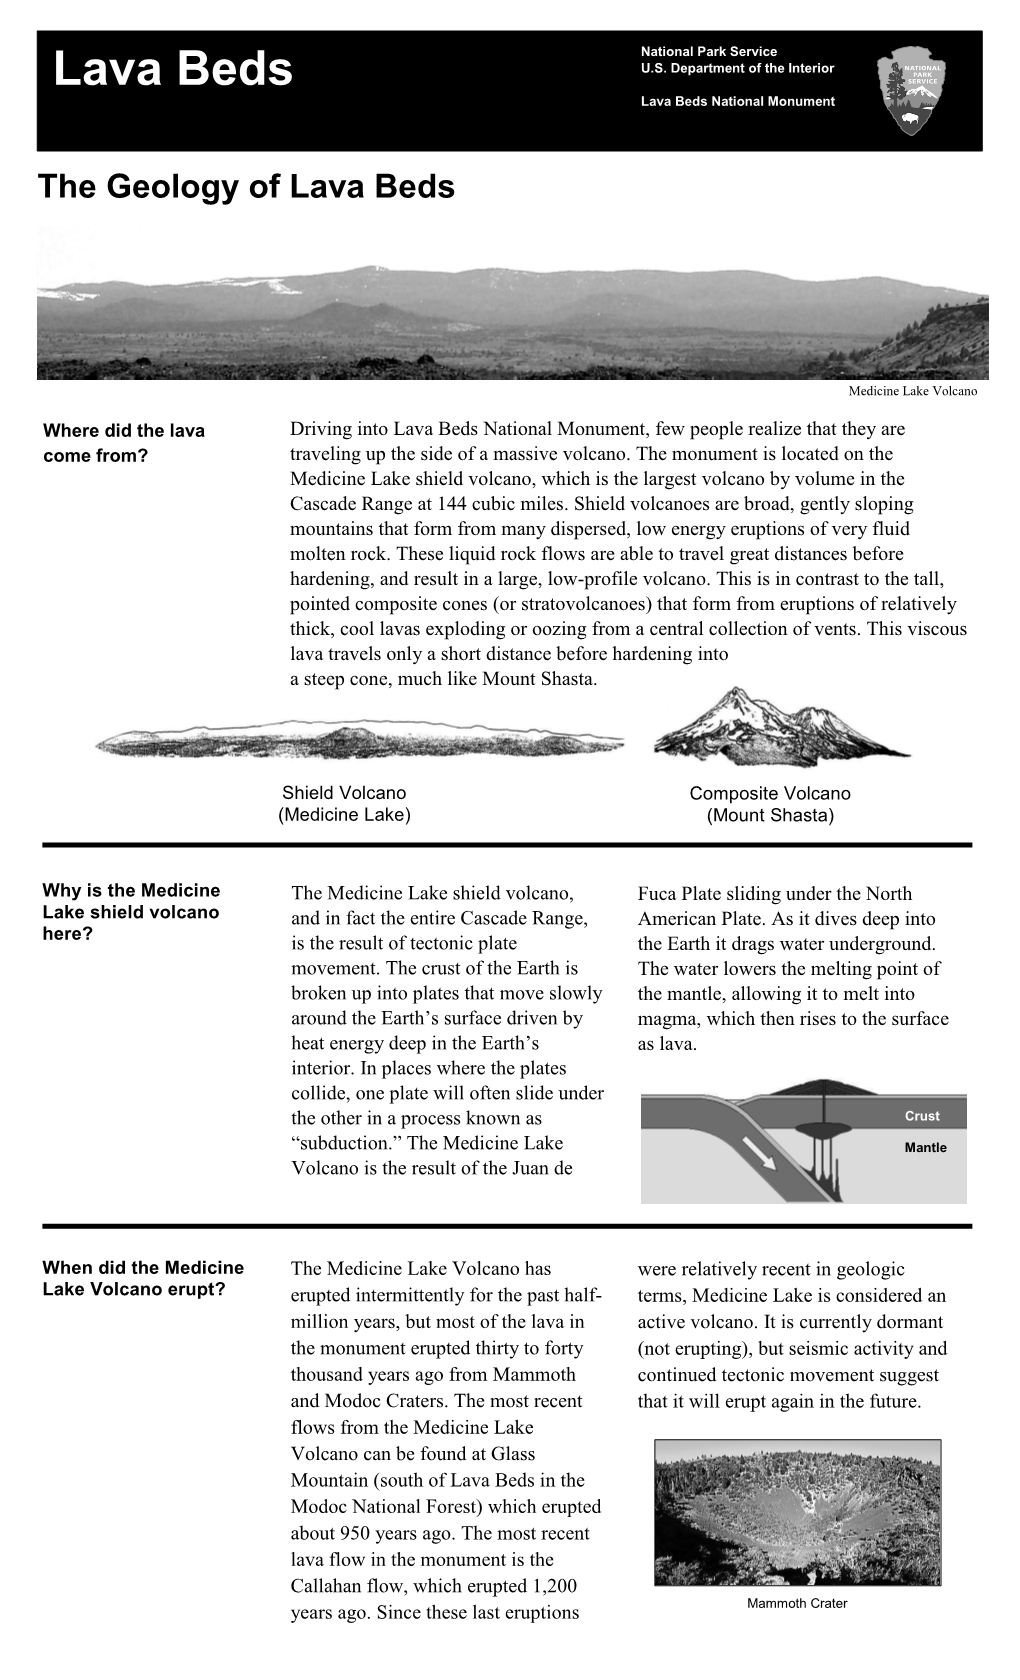 The Geology of Lava Beds